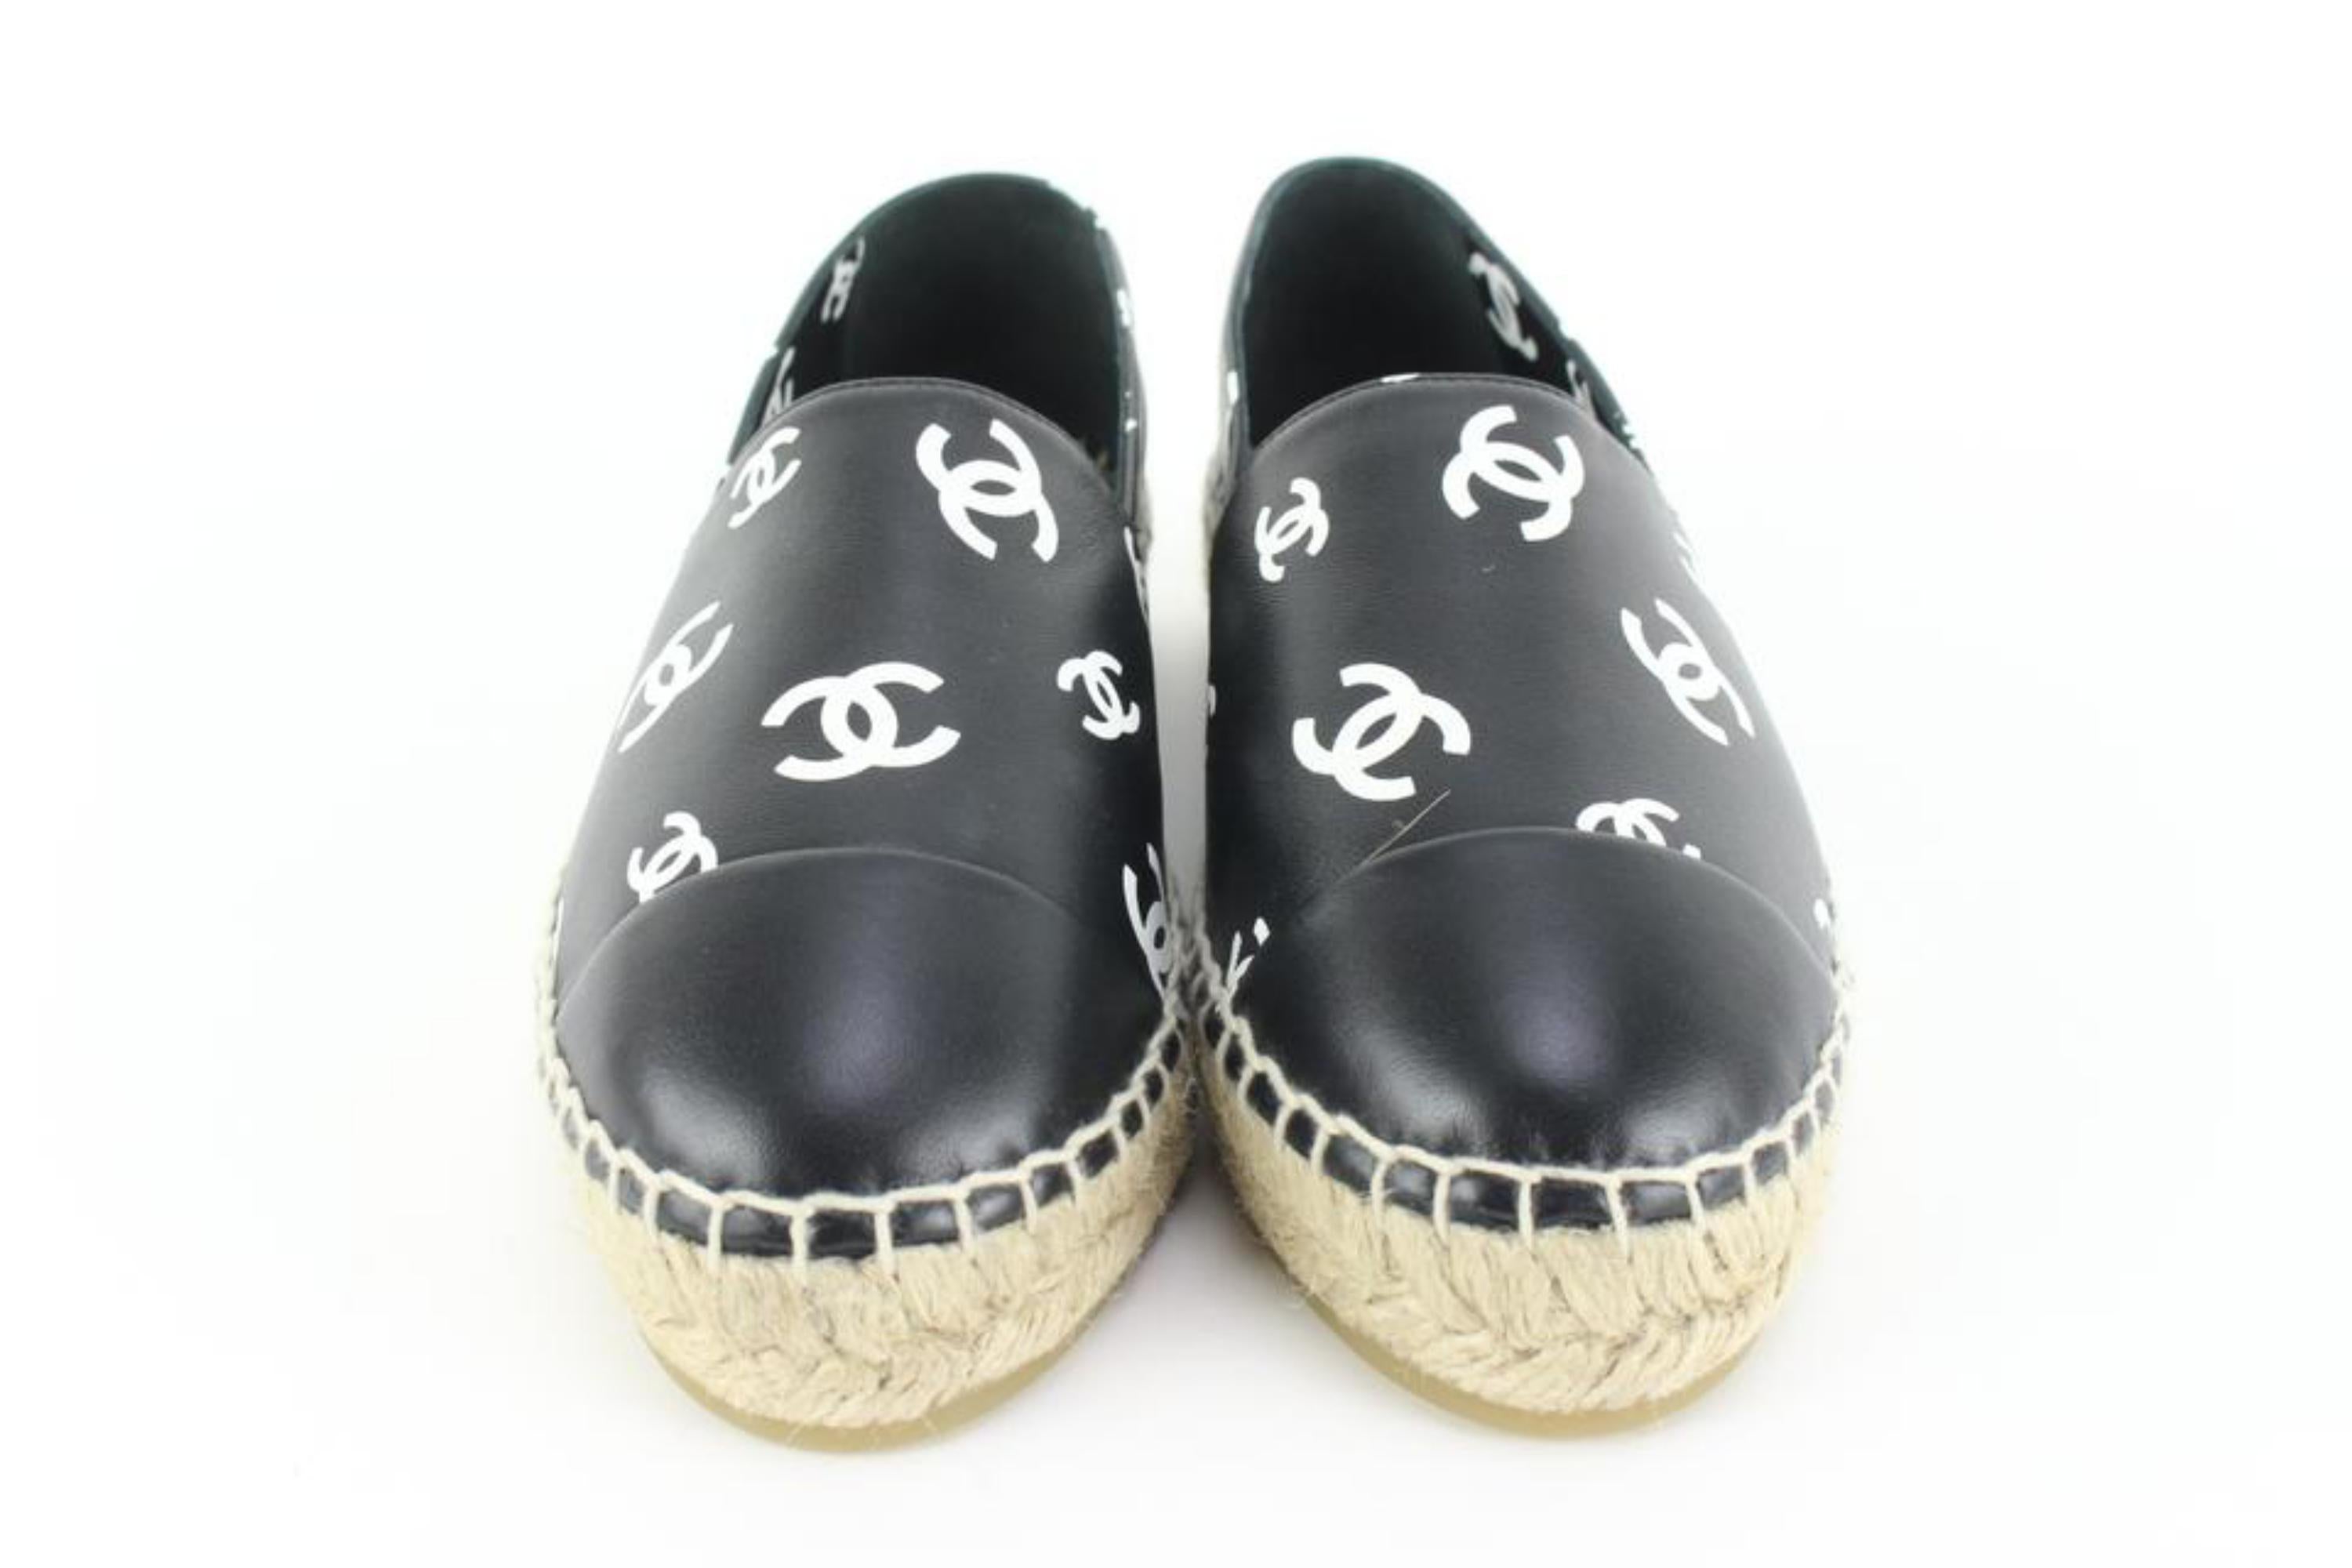 CHANEL Espadrilles COCO Mark Leather Shoes 36 Black X White Auth